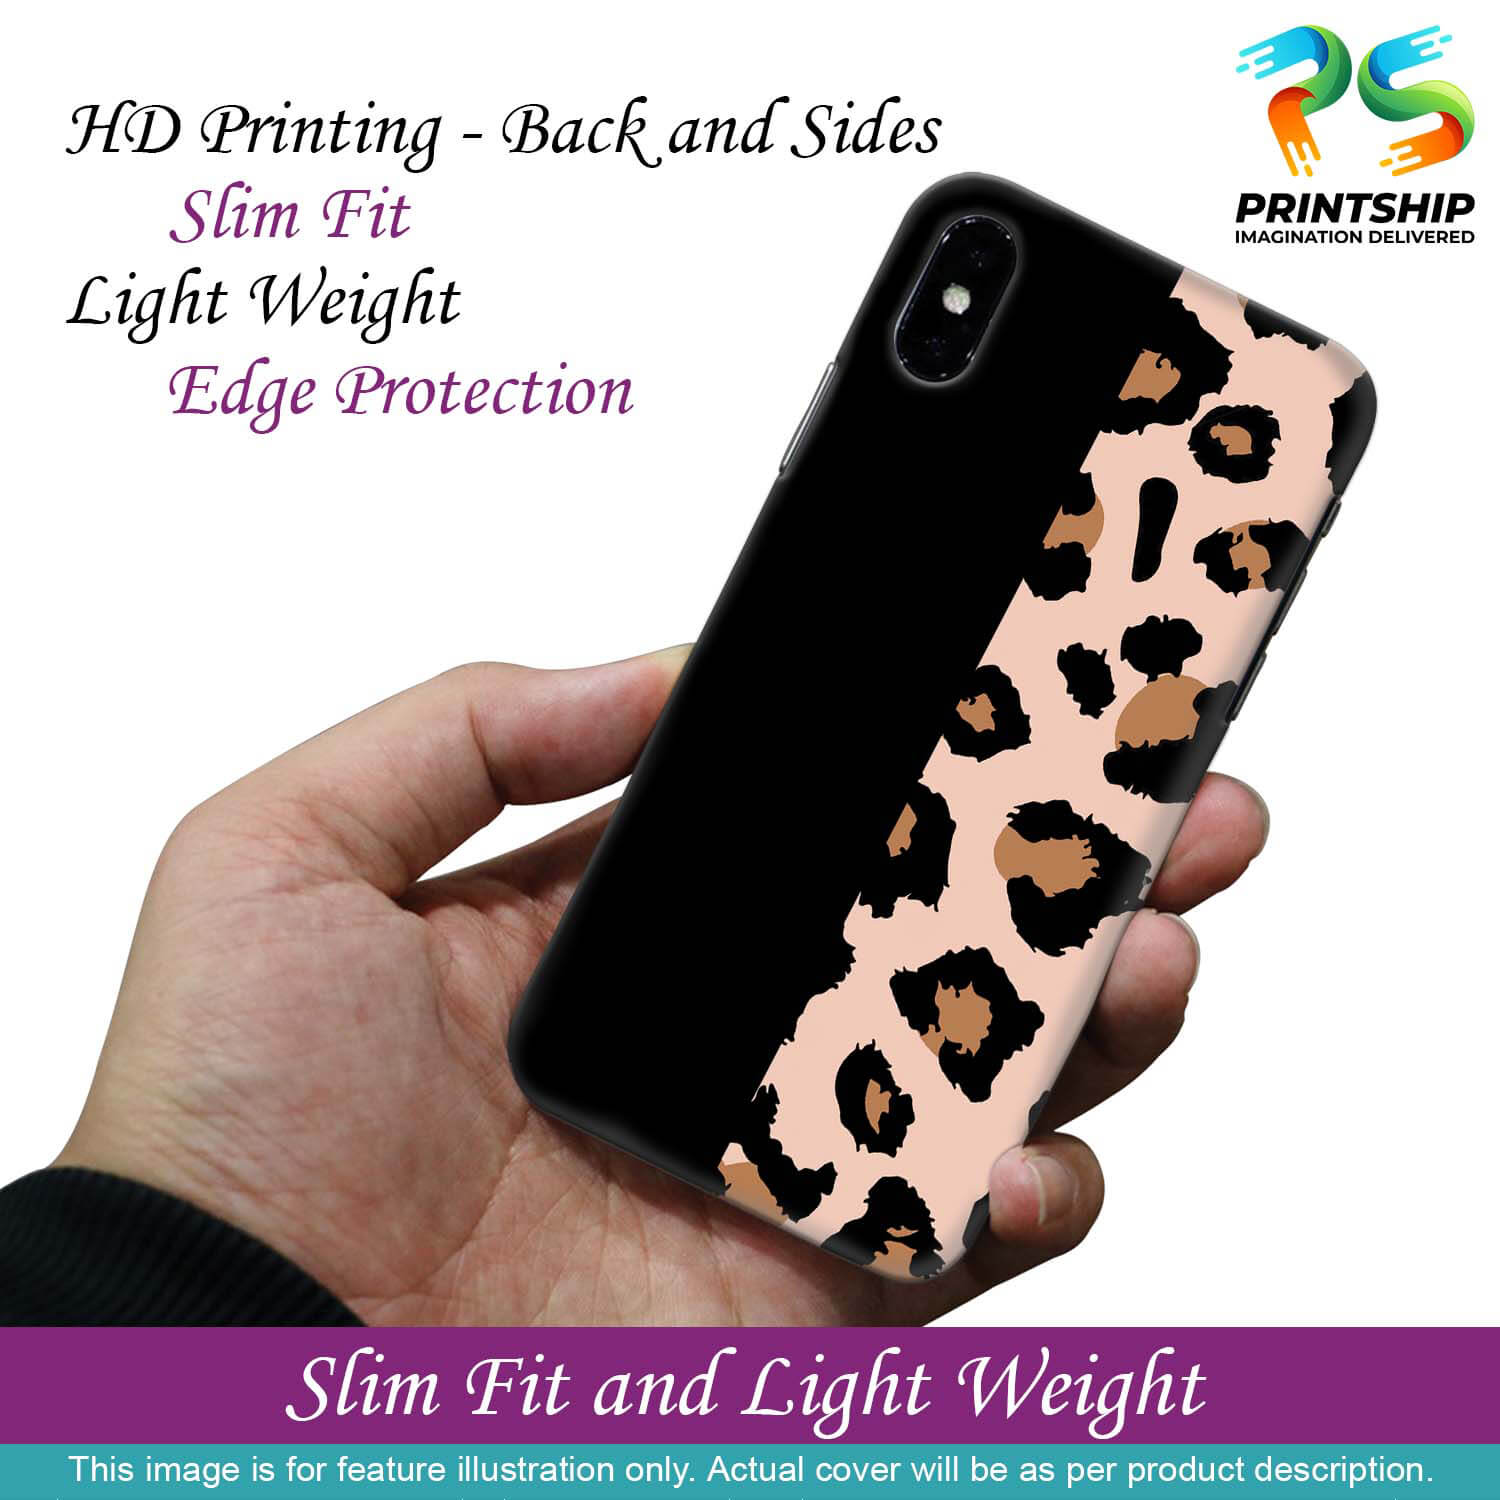 PS1339-Animal Patterns Back Cover for Oppo A15 and Oppo A15s